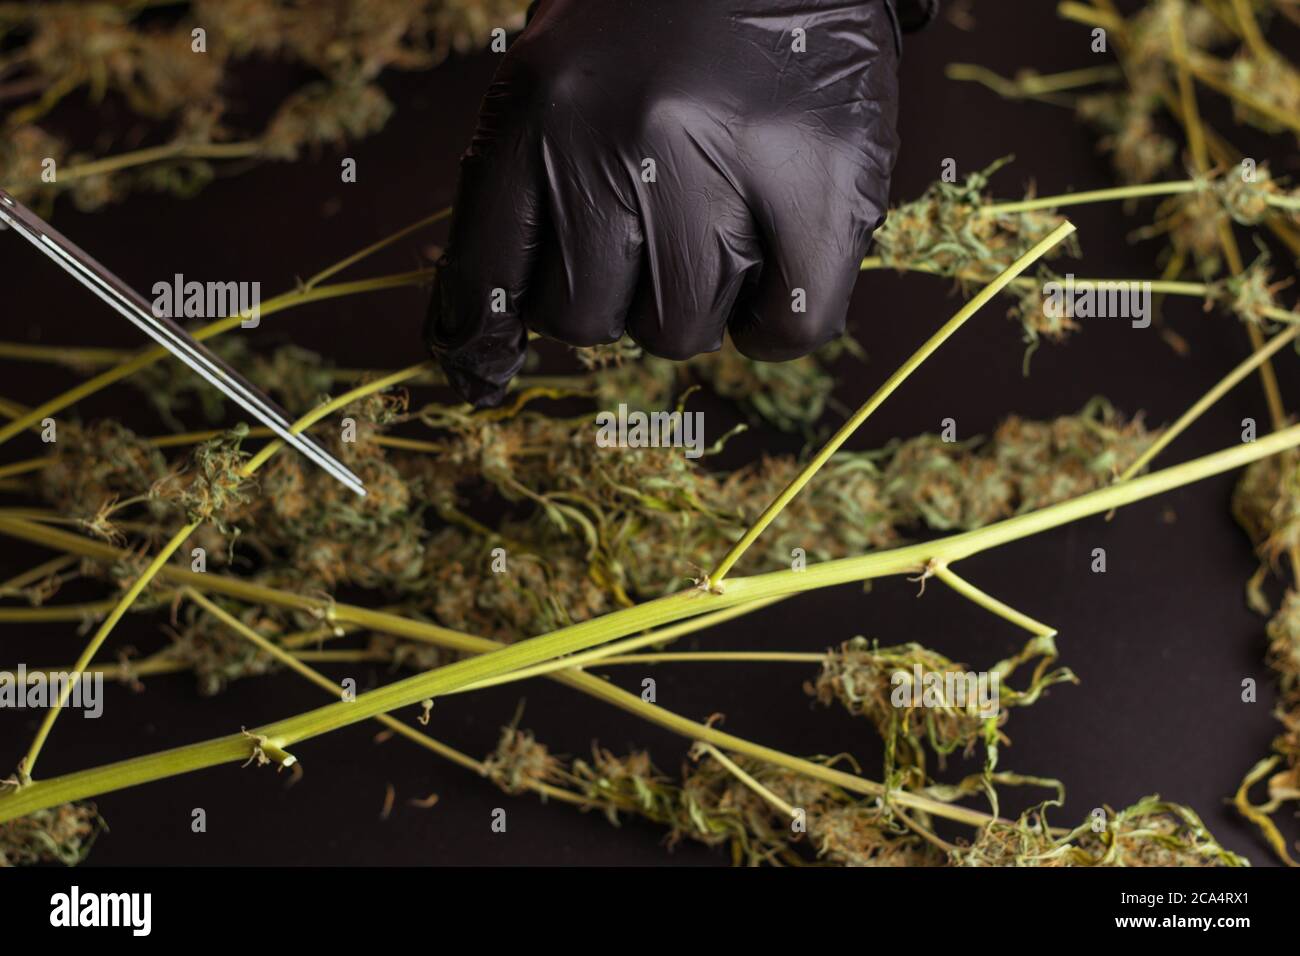 Man trimming weed plants with scissors. Cannabis processing, commercial marijuana business. Stock Photo